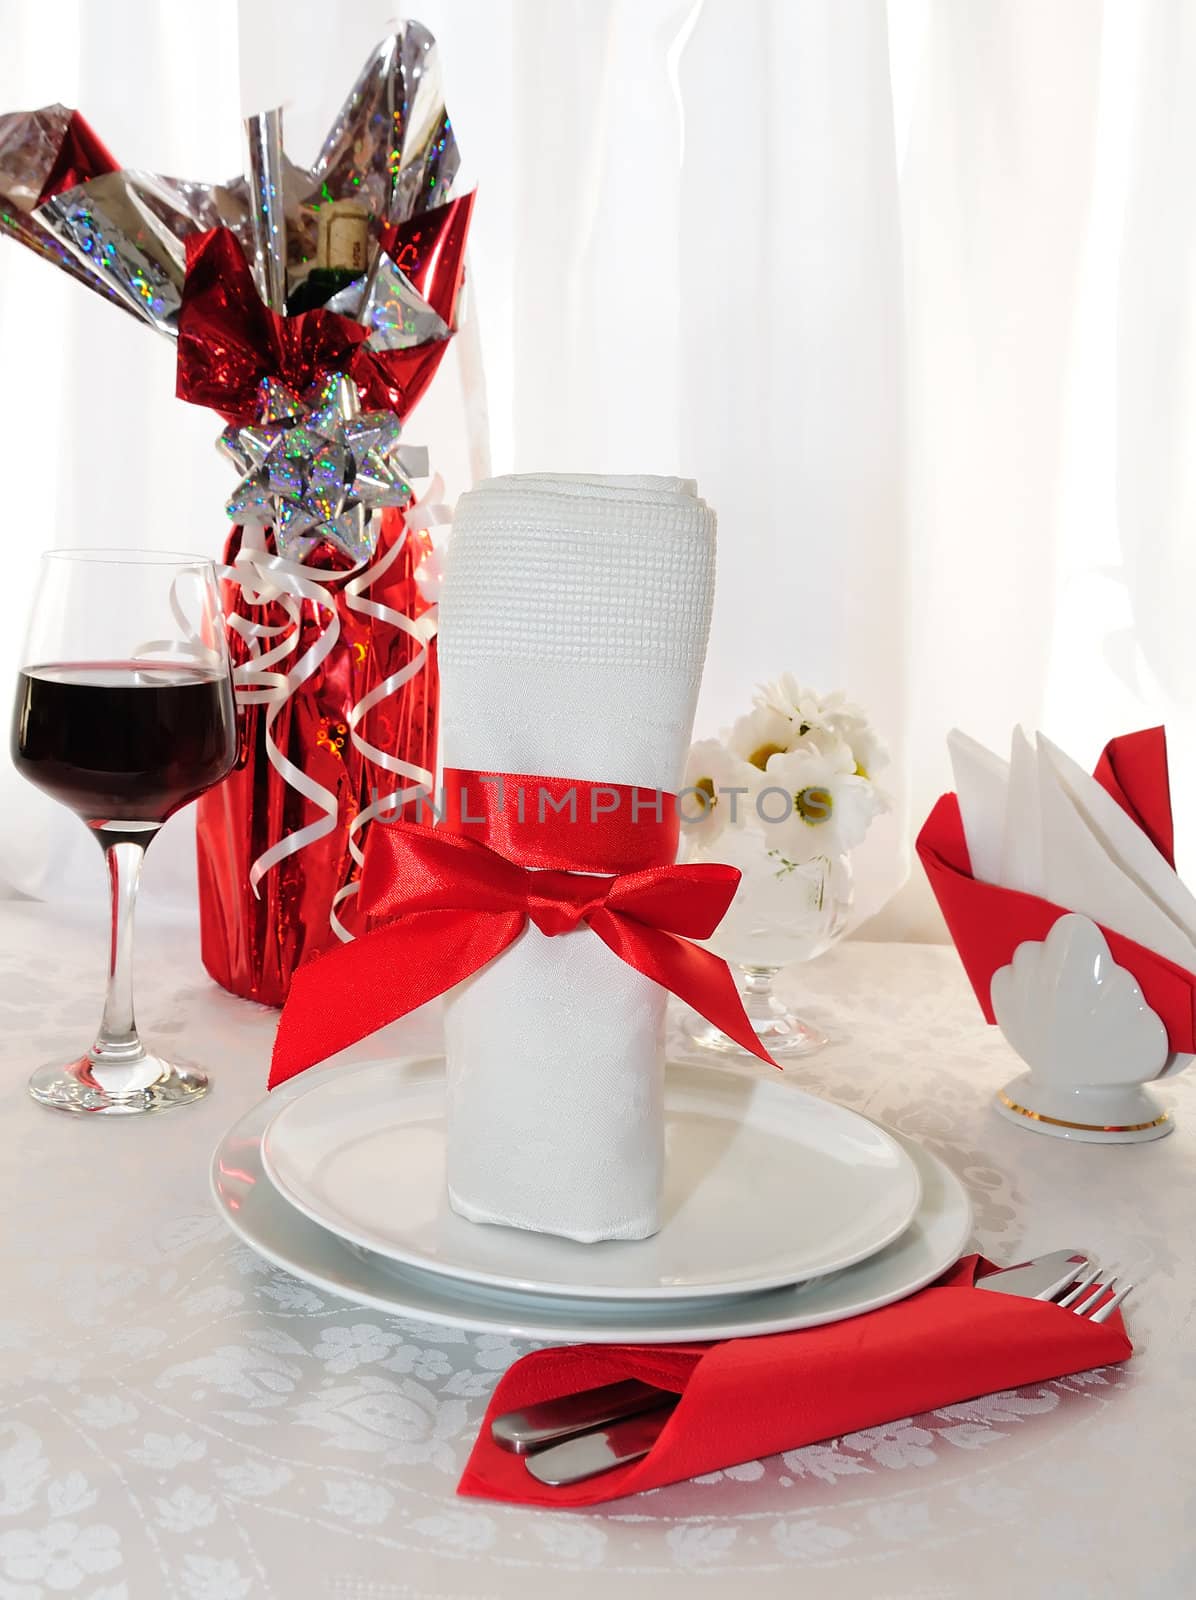 Serving holiday table by Apolonia